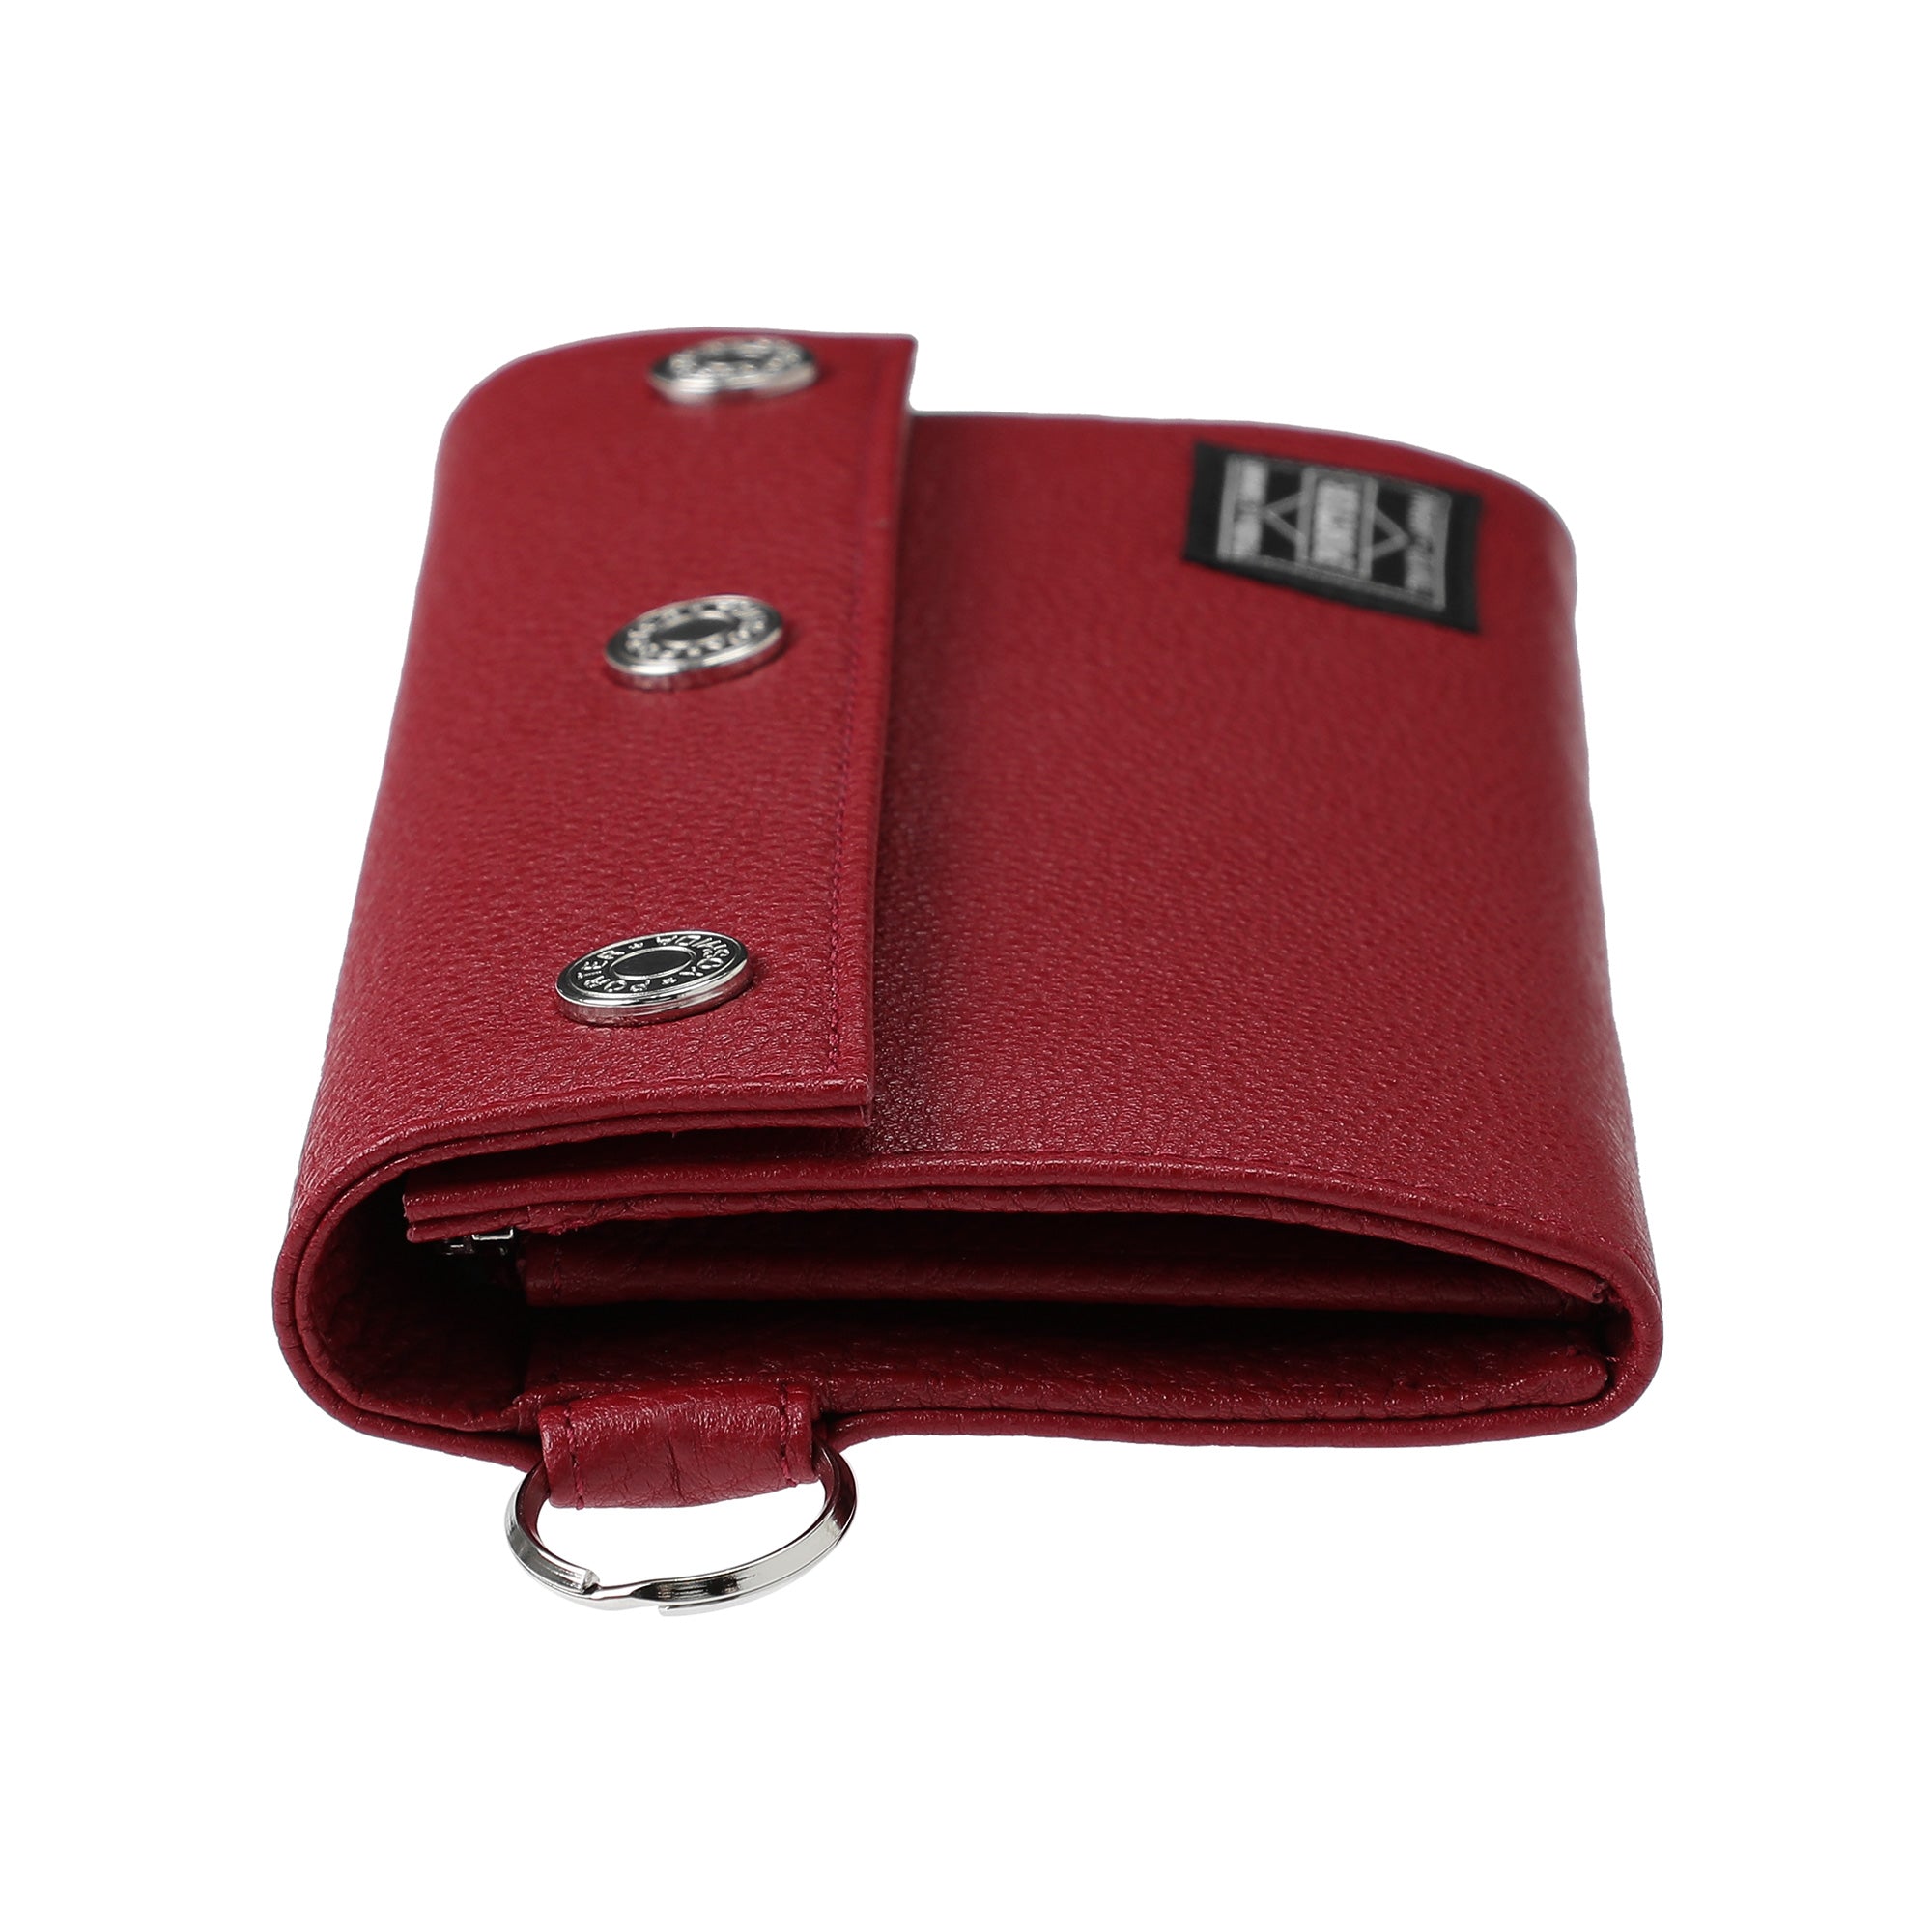 PORTER - Shrink Long Purse - (Red) view 3